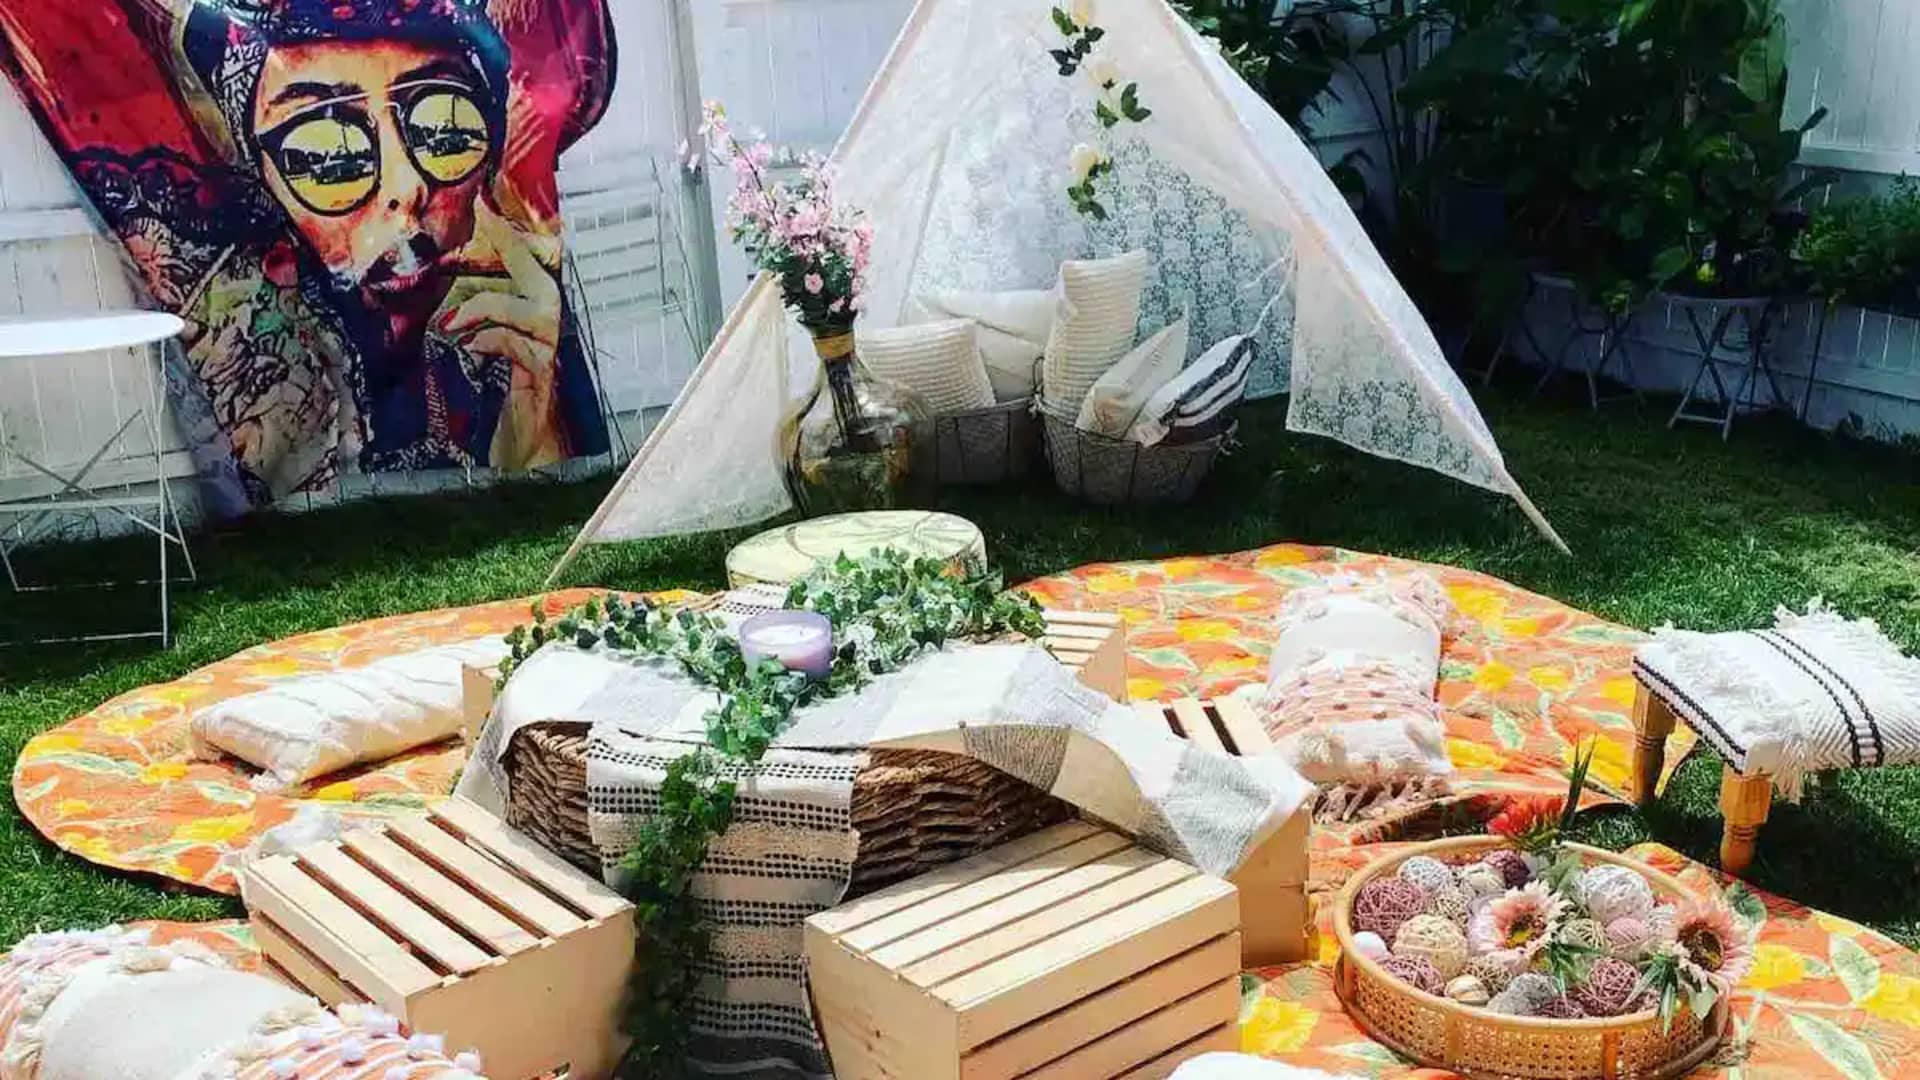 At her bed-and-breakfast Nicole Butler hosts backyard picnics with THC-infused food.